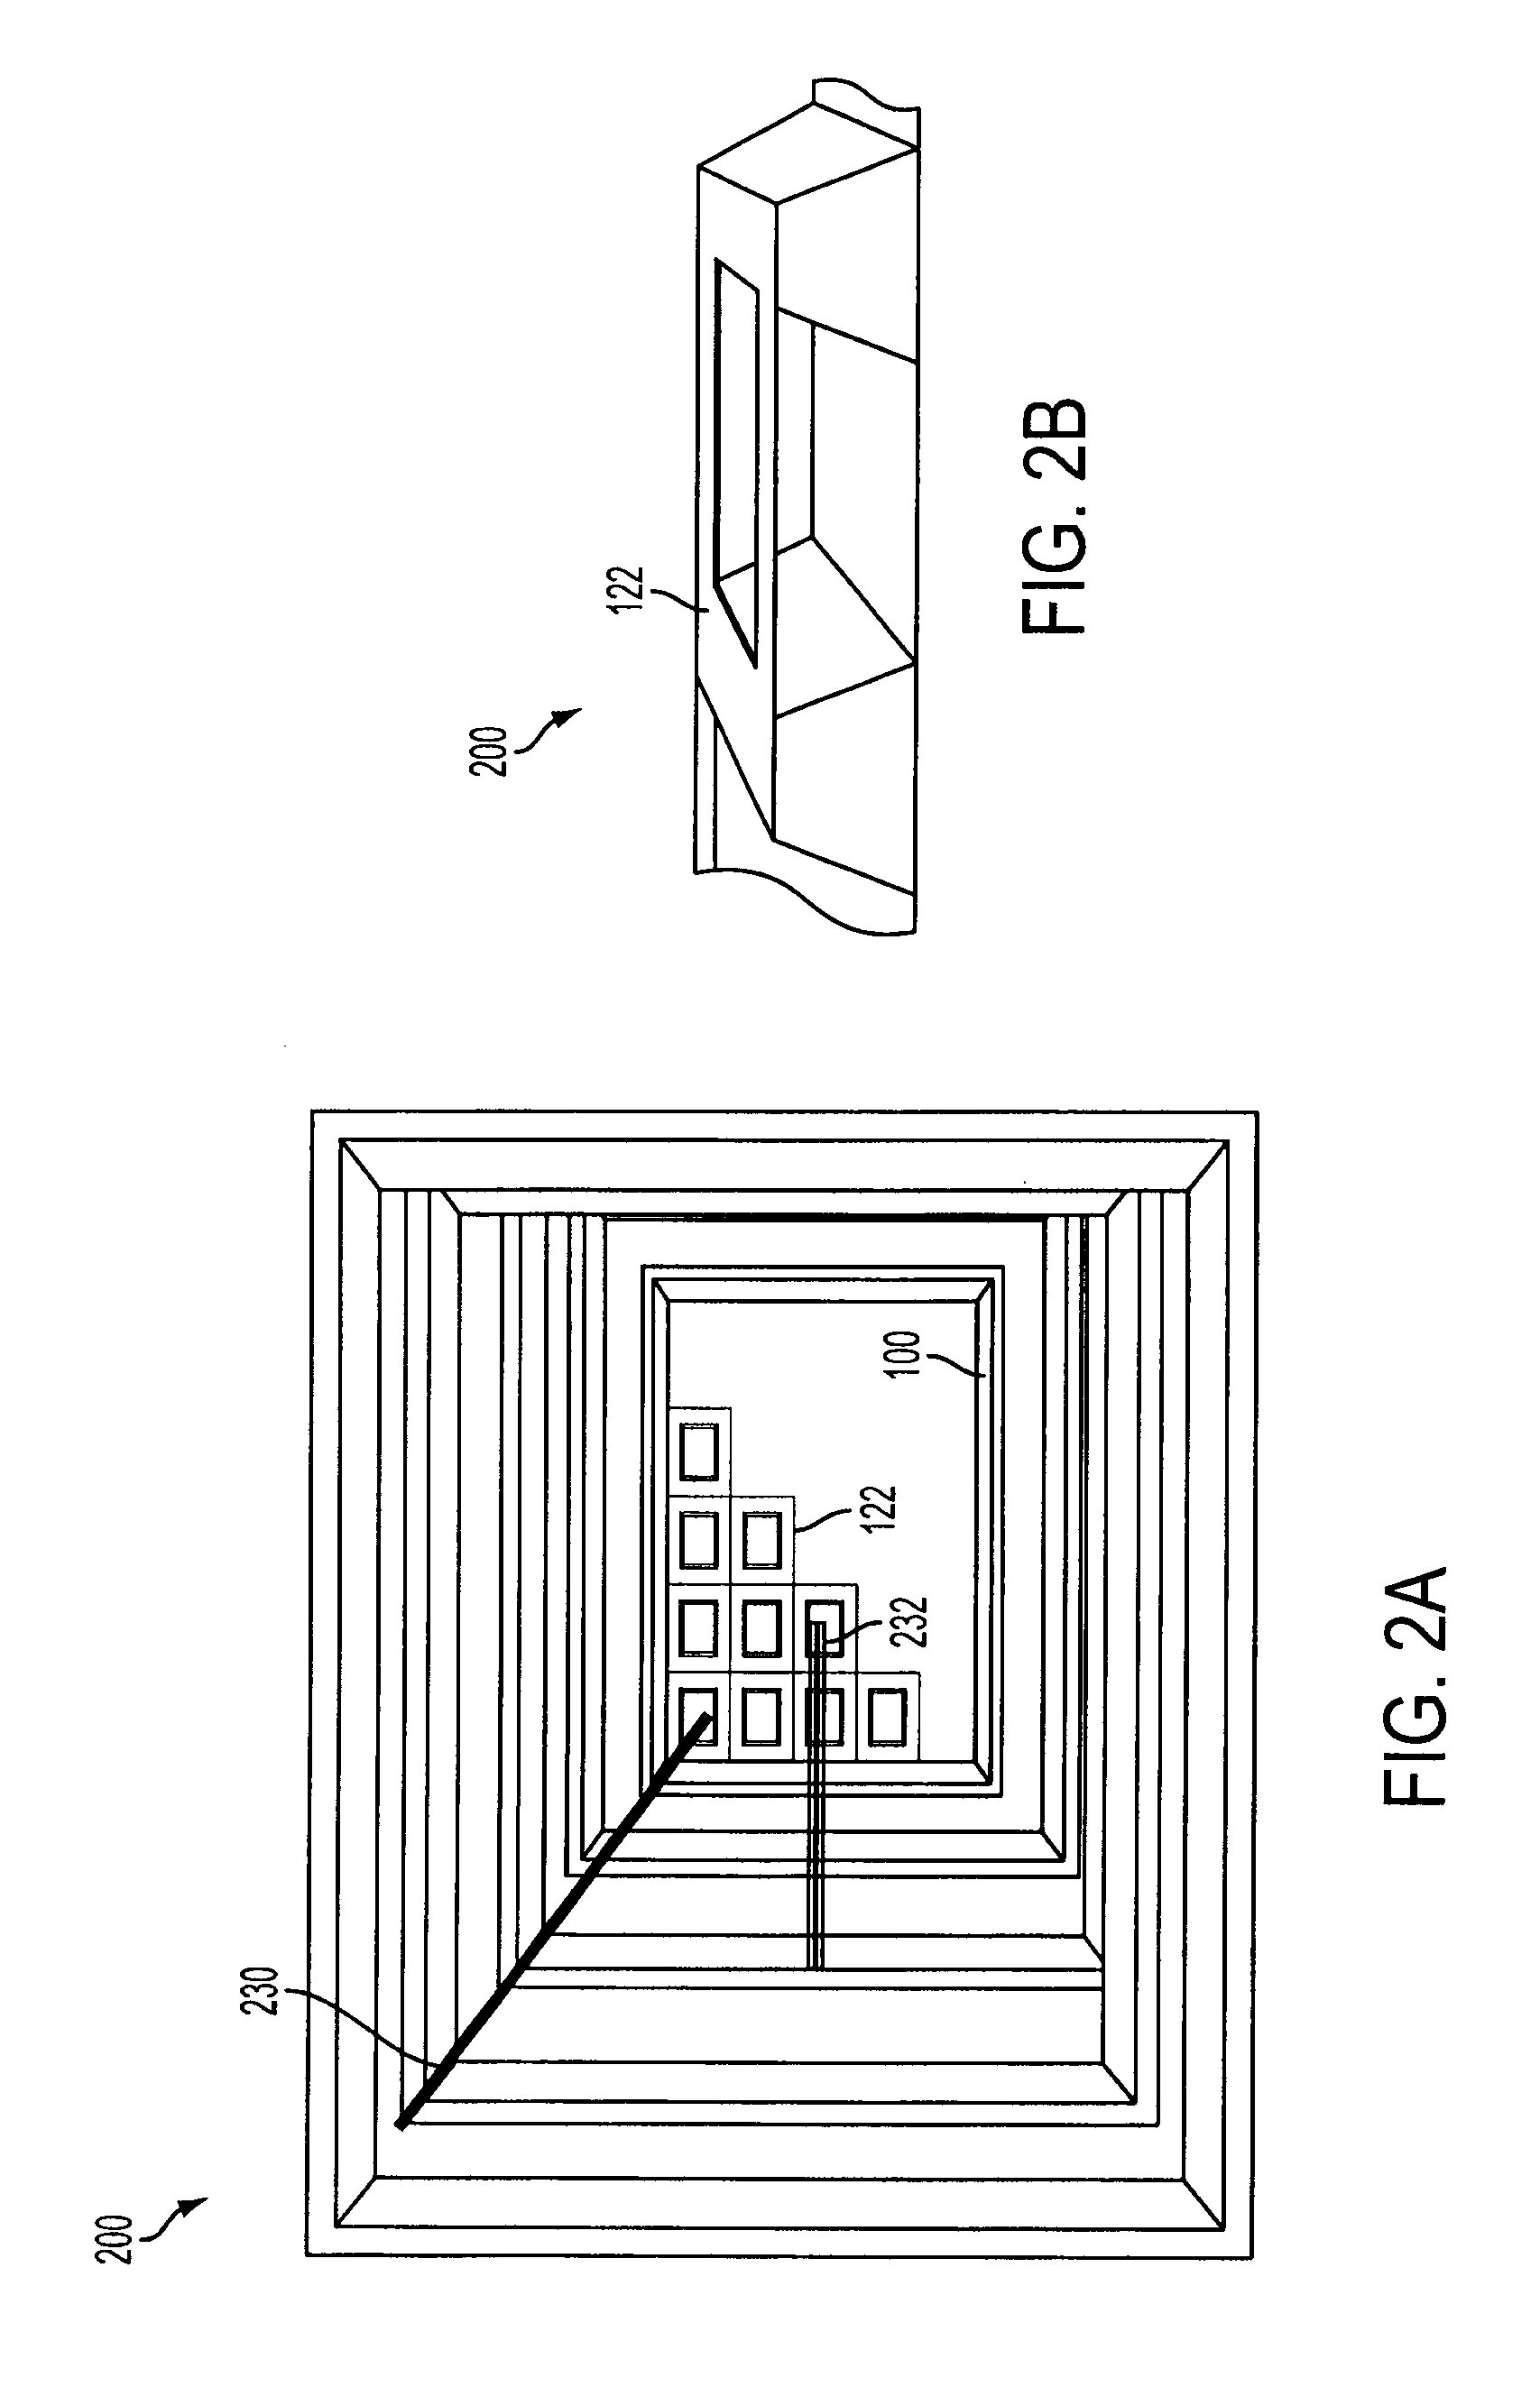 Methods of recovering hydrocarbons from hydrocarbonaceous material using a constructed infrastructure having permeable walls and associated systems